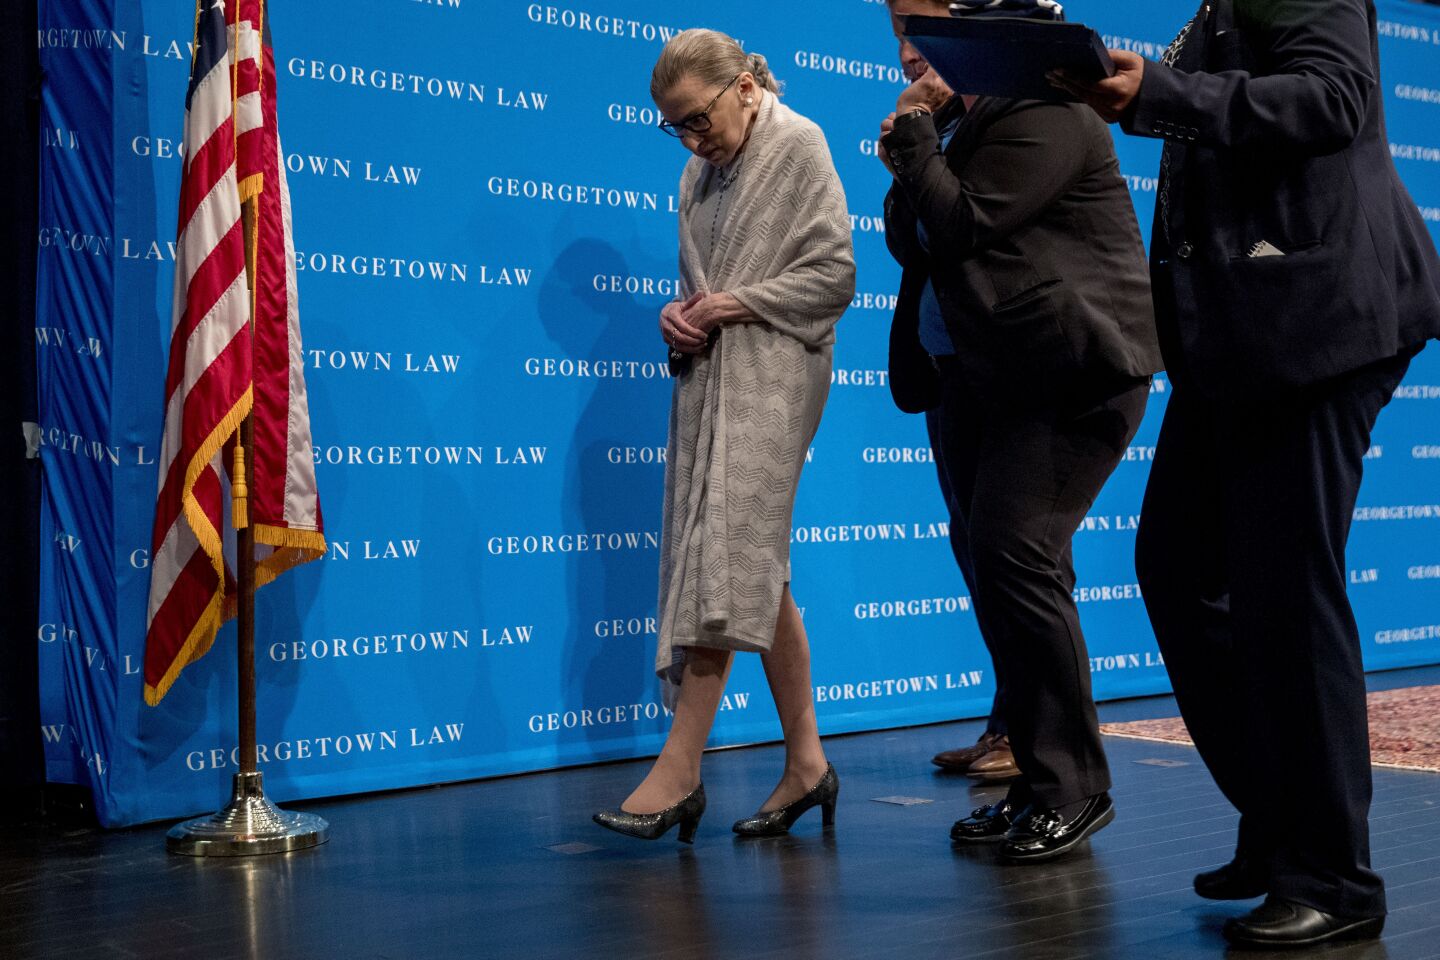 Justice Ruth Bader Ginsburg walks in front of a blue background with the words "Georgetown Law"